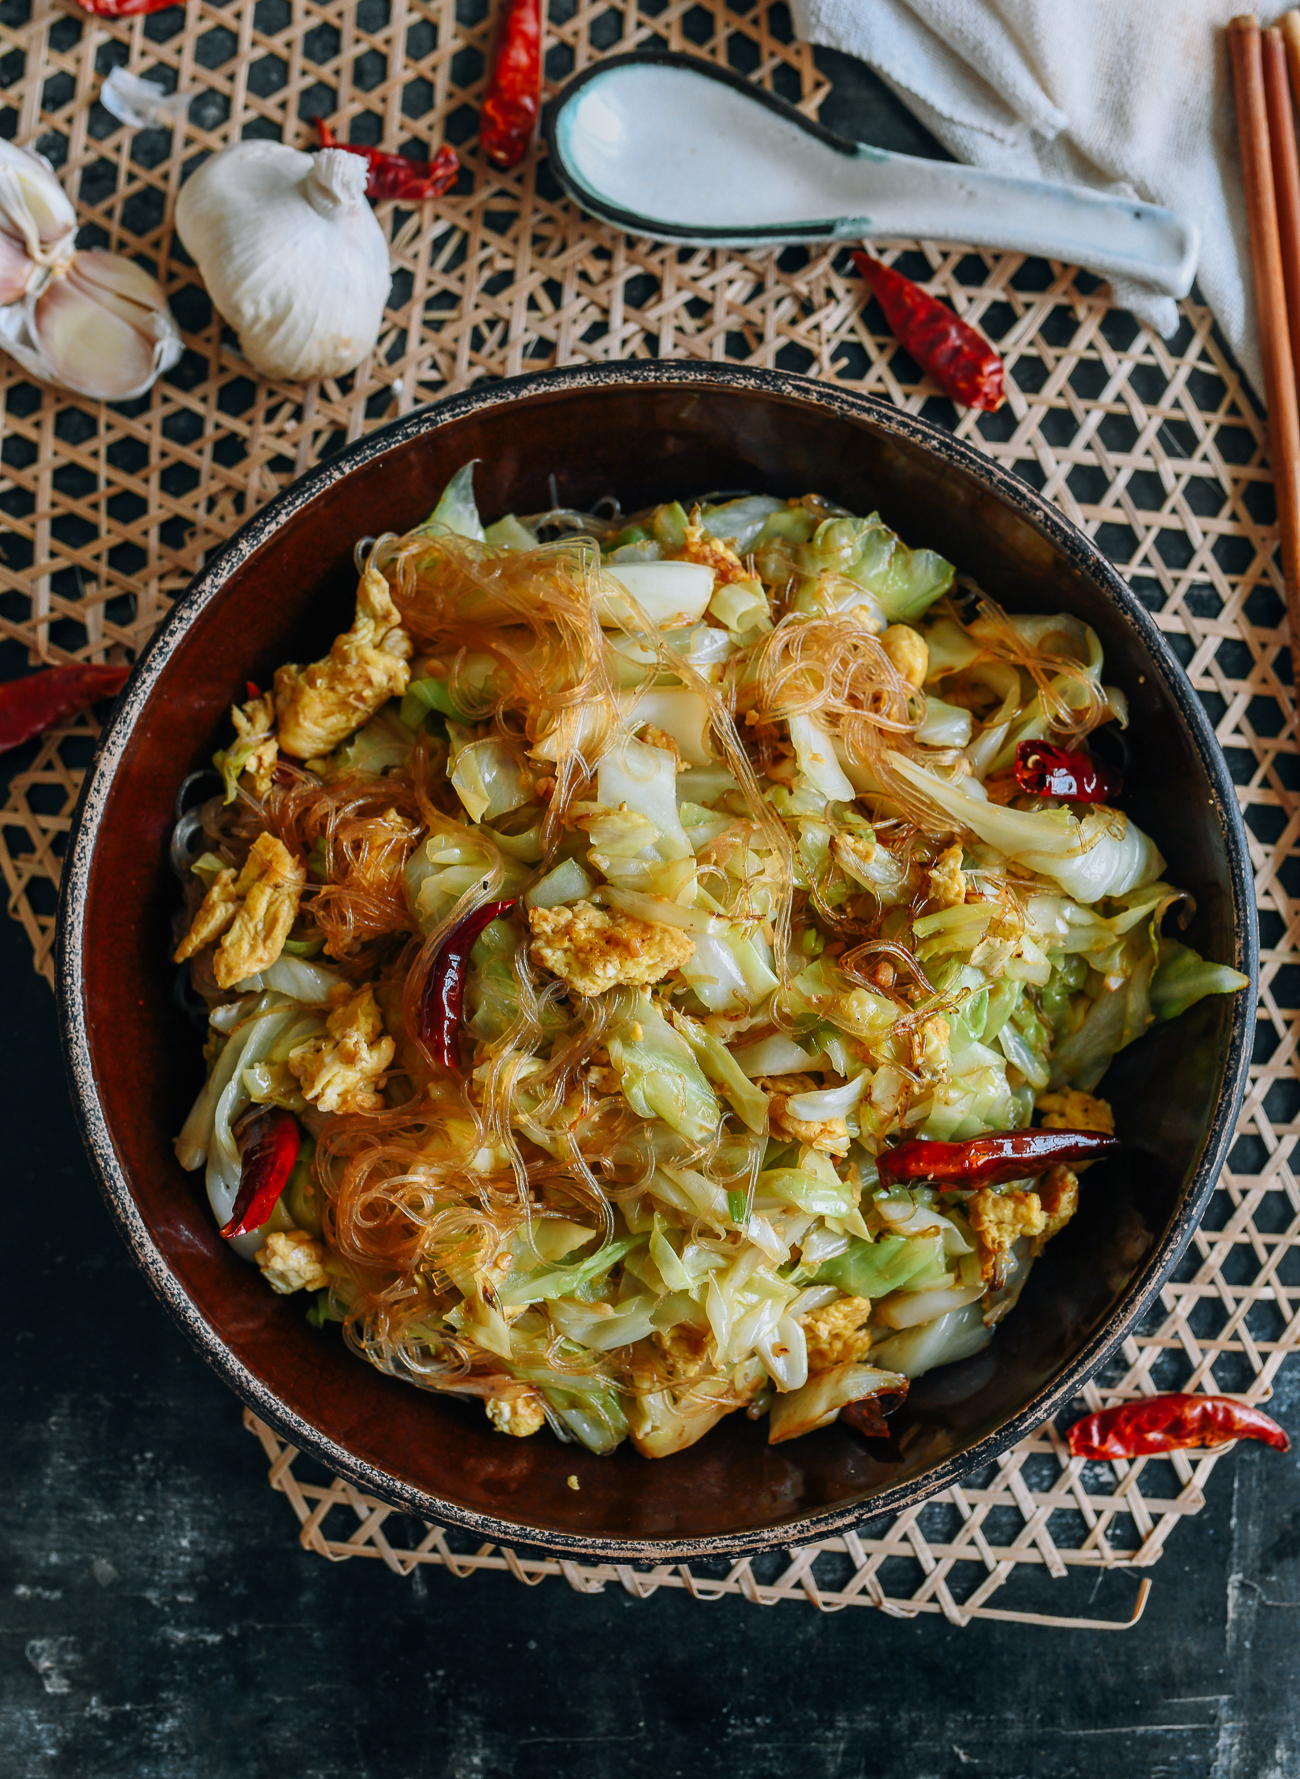 Cabbage stir-fry with noodles and eggs